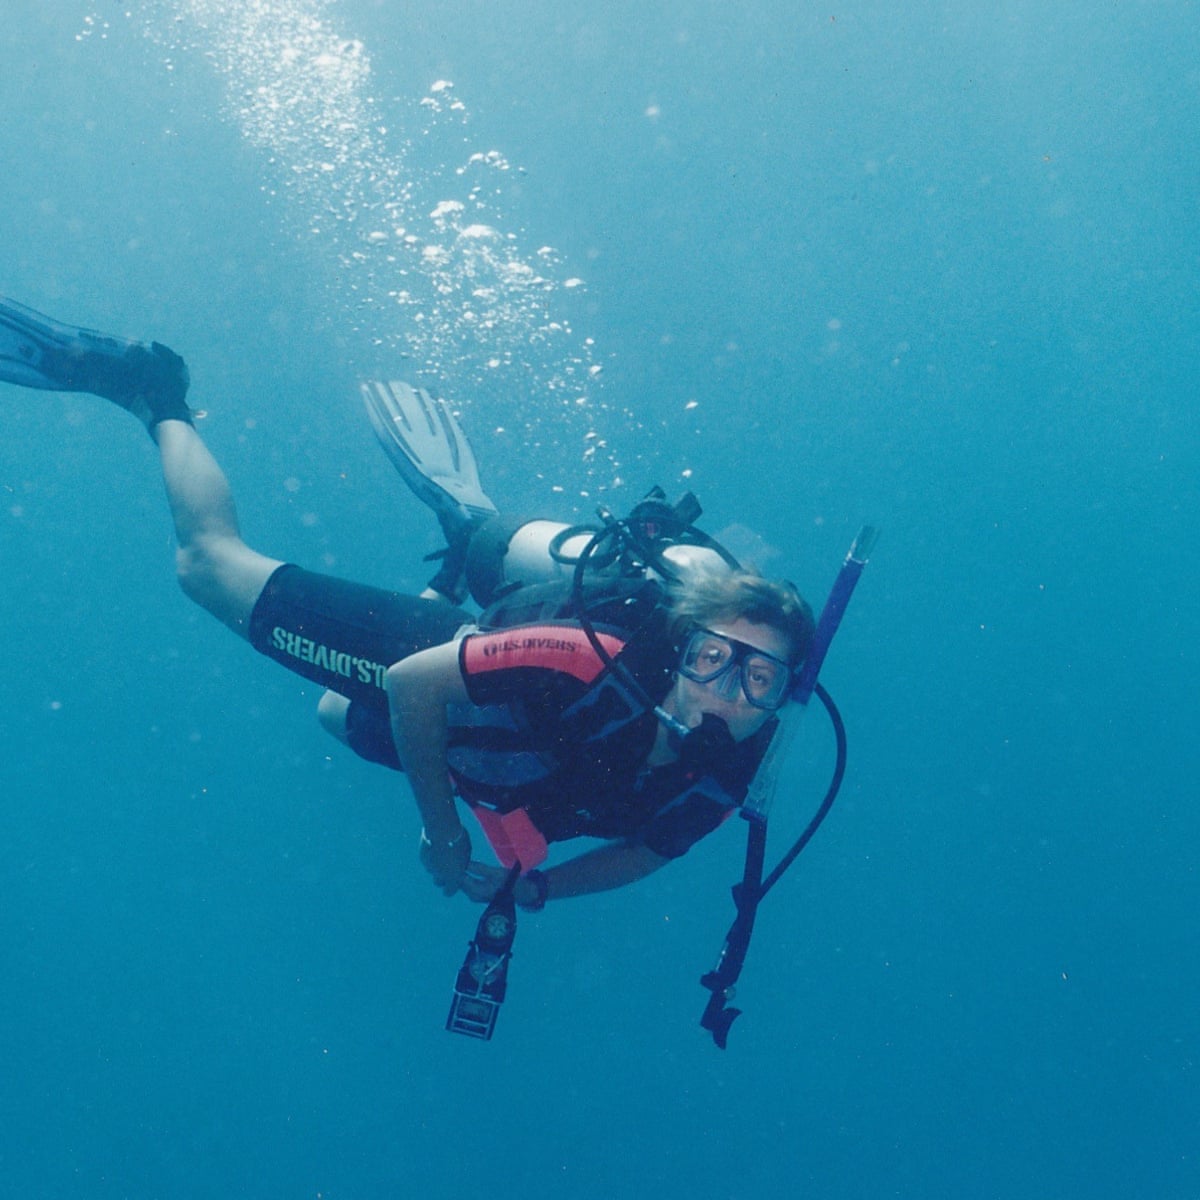 A moment that changed me: a scuba dive gone horribly wrong taught